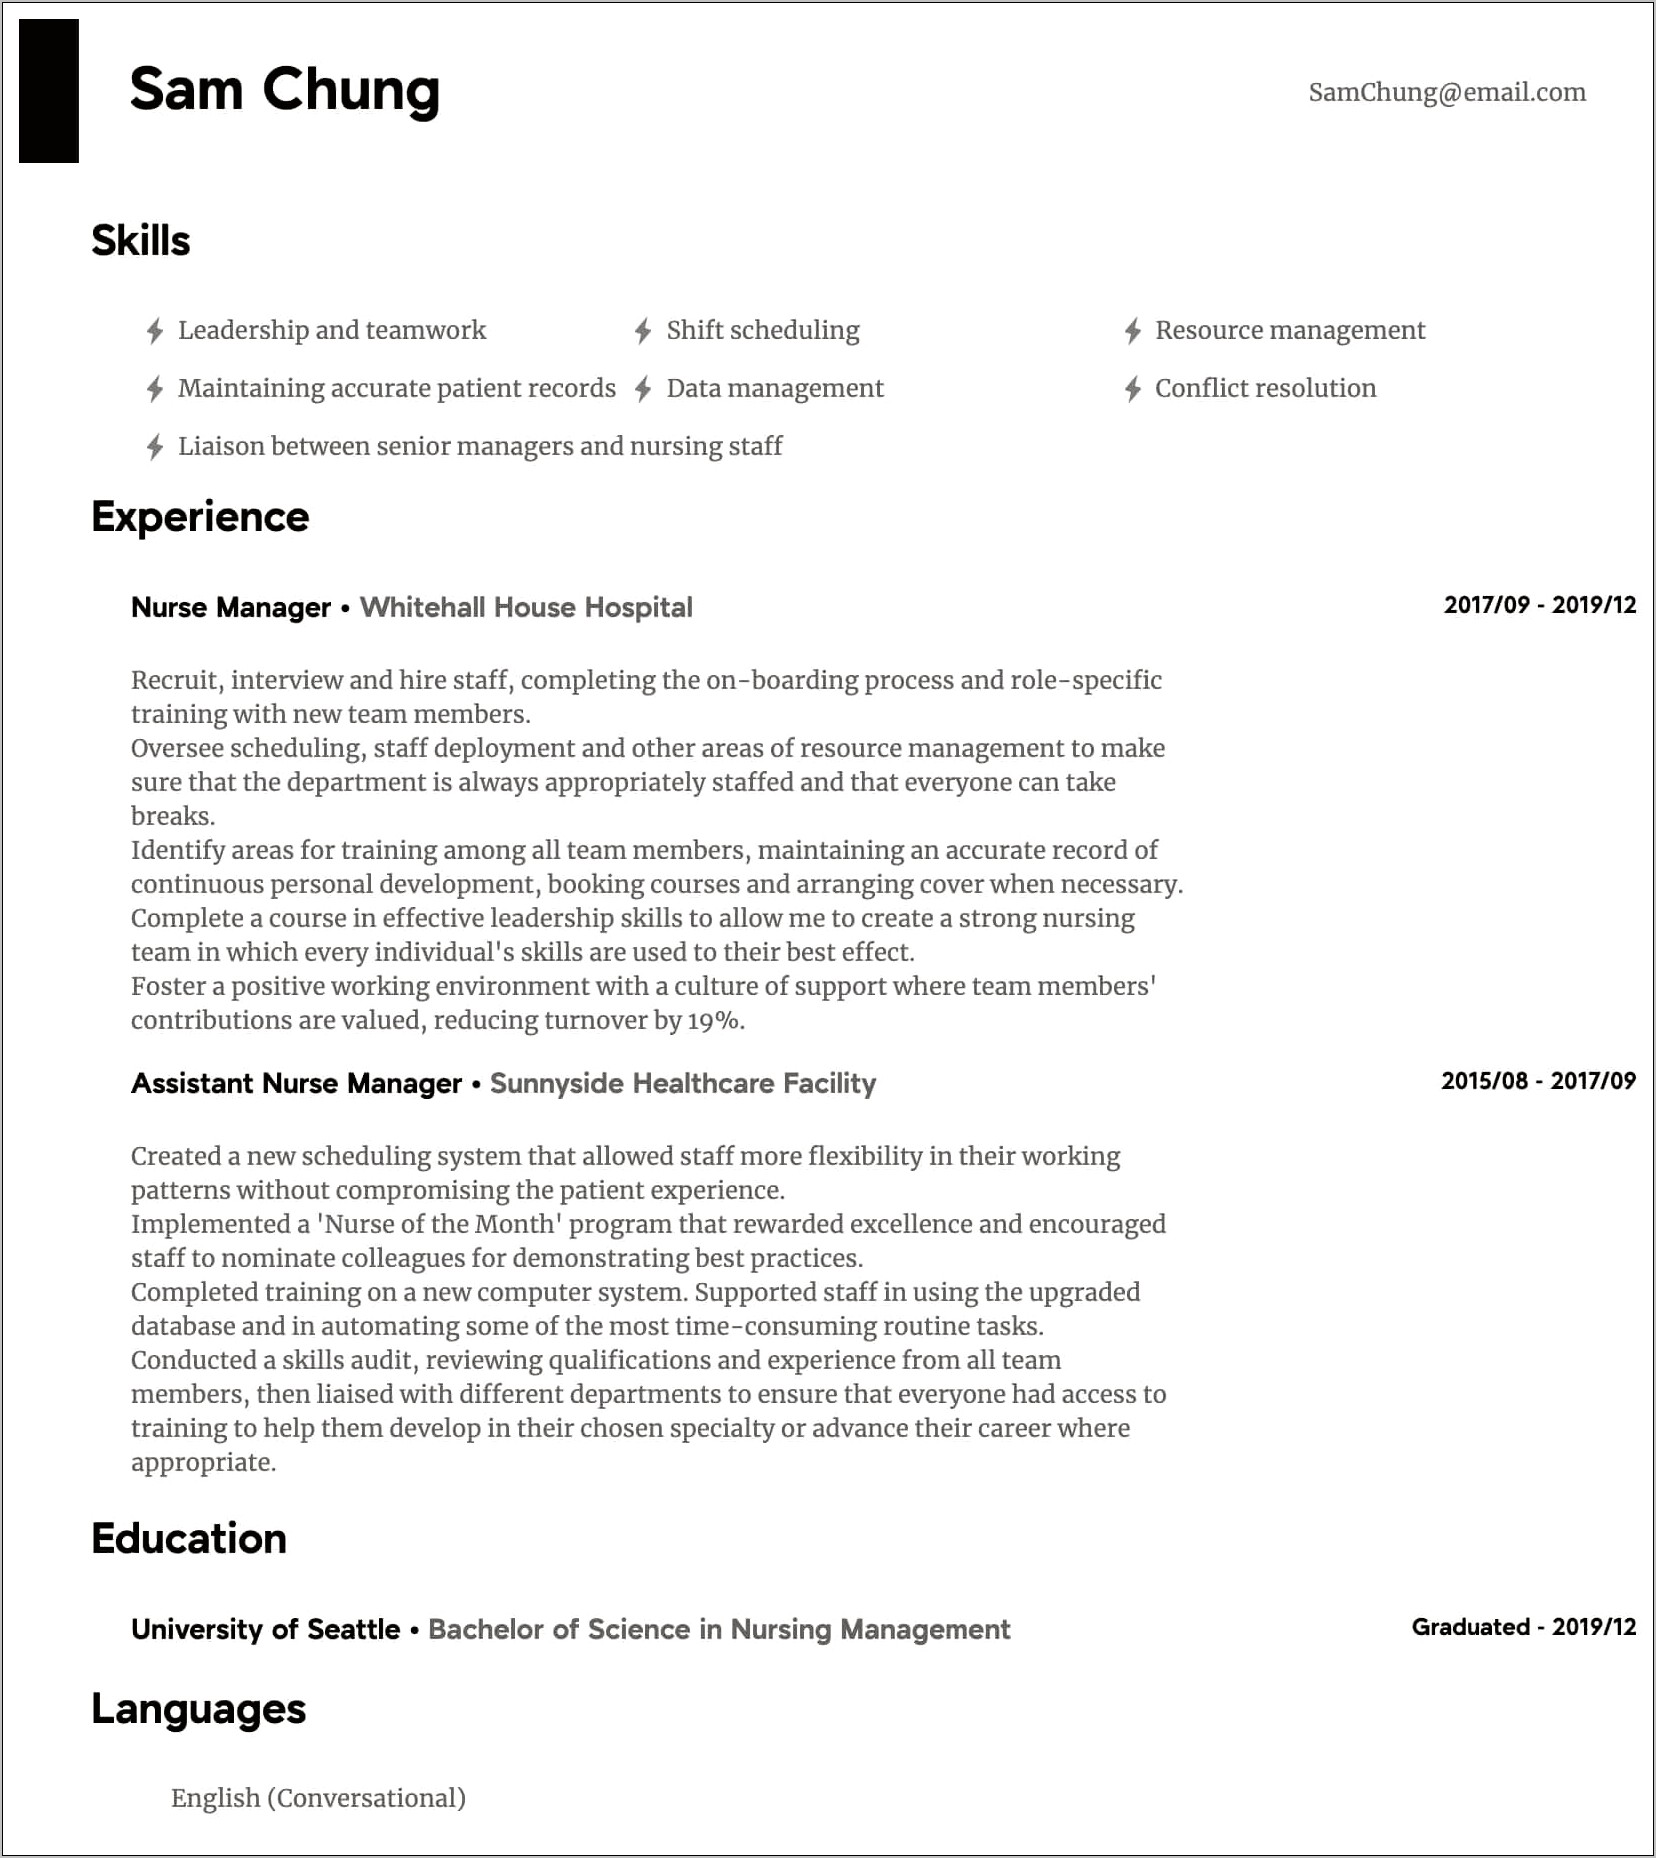 Resume Objective Nursing Assistant Examples